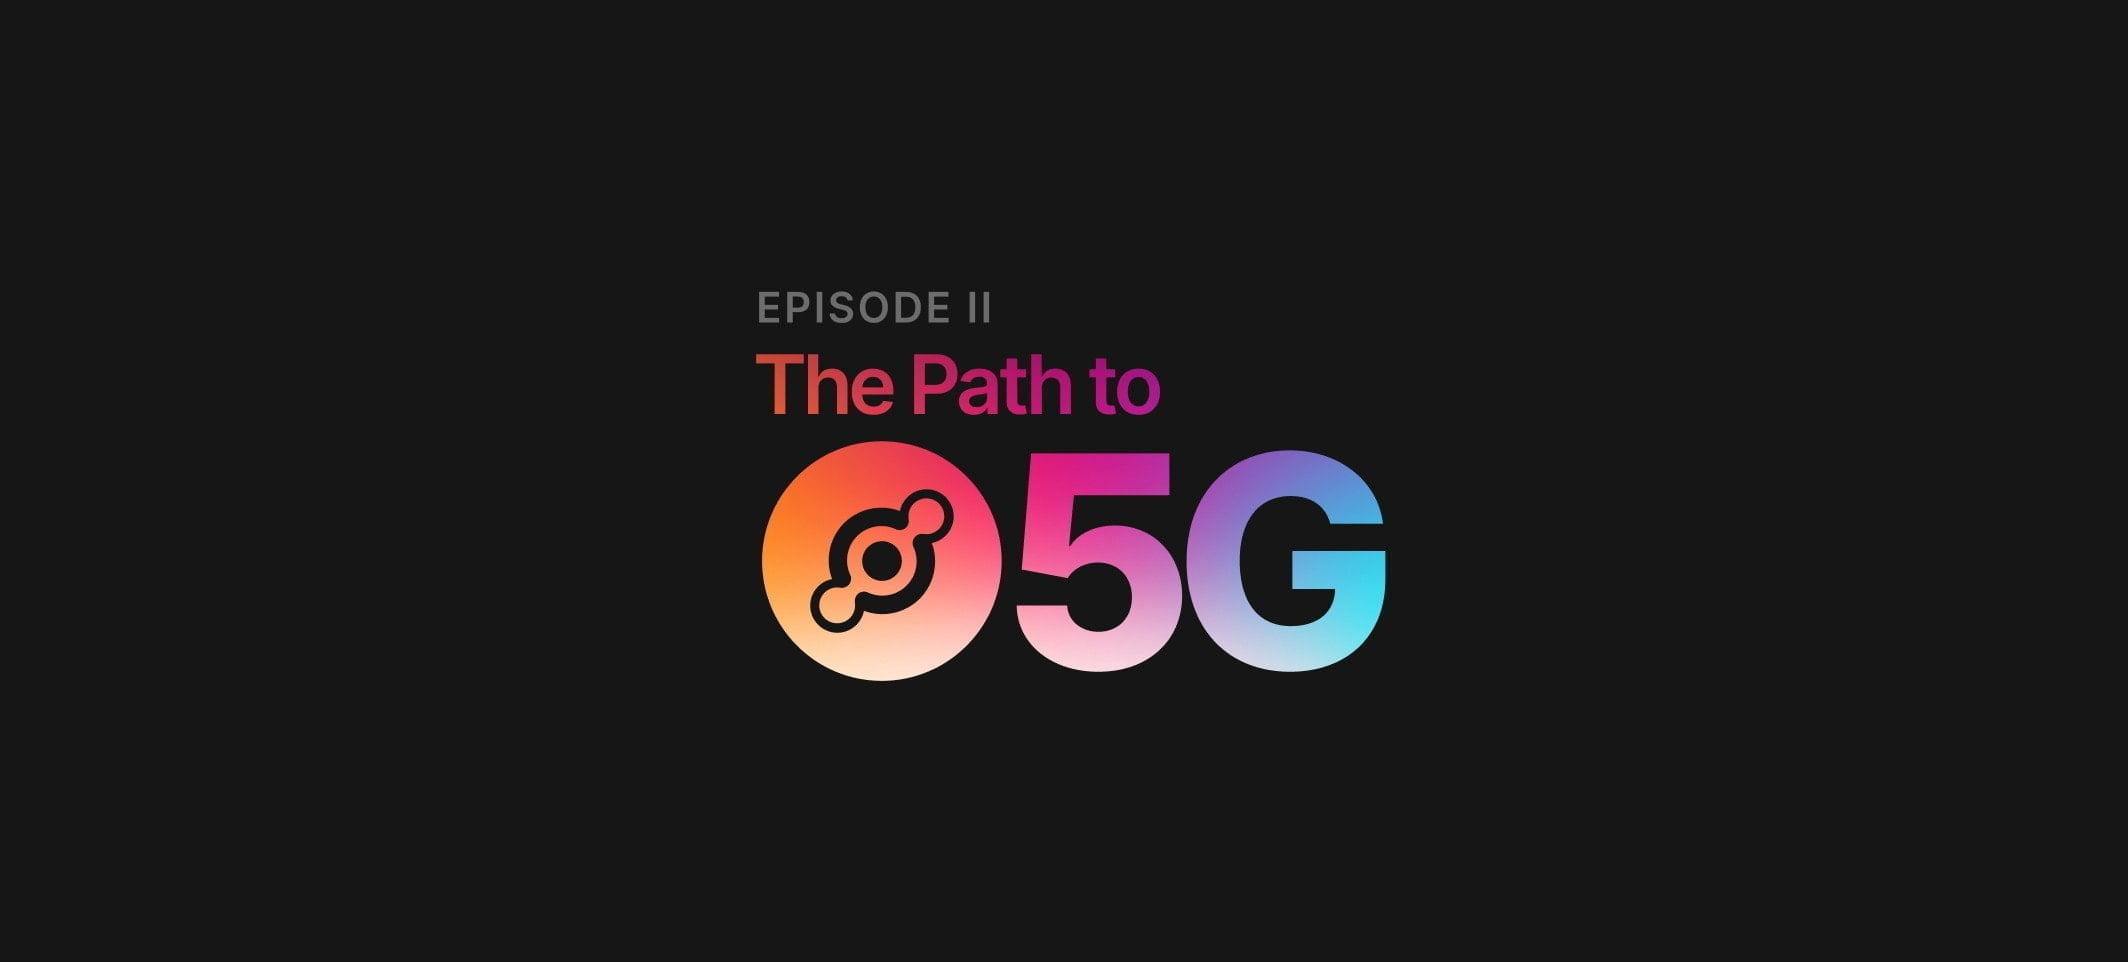 Helium 5G Hotspot announced but with a high price & likely reduced HNT mining profitability come September – A people powered 5G network